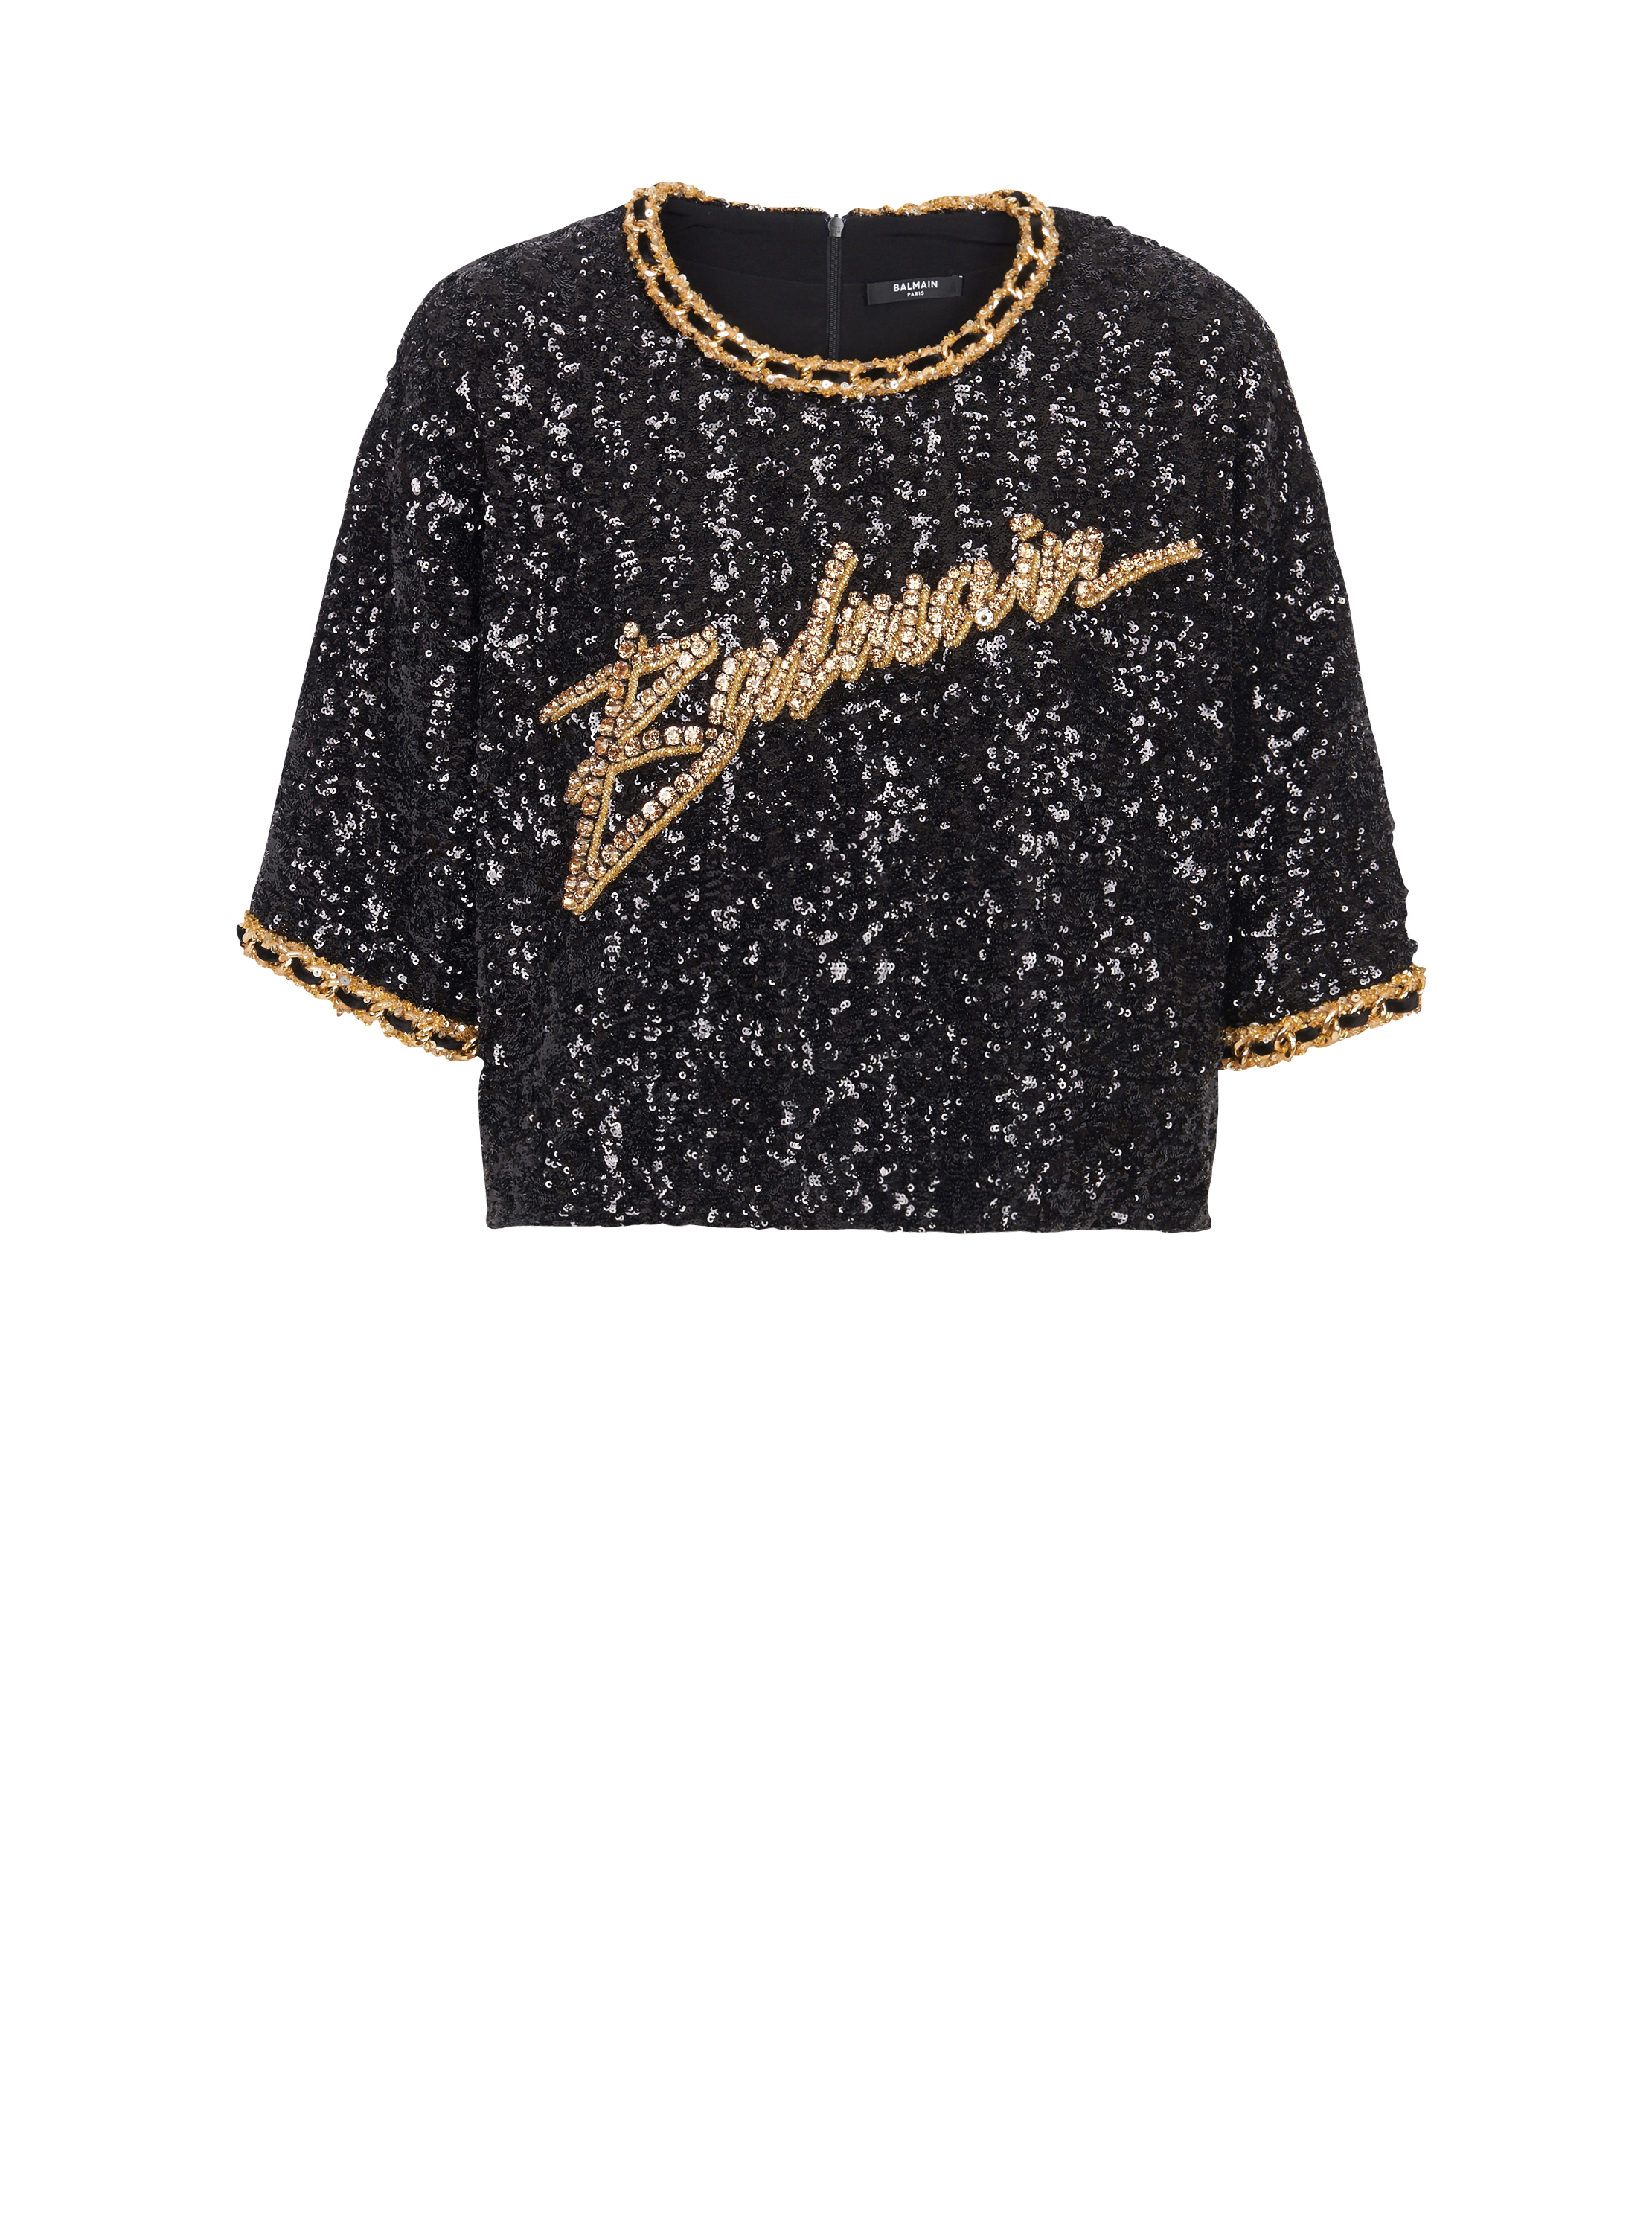 Cropped T-shirt with sequin embroidery, black, hi-res